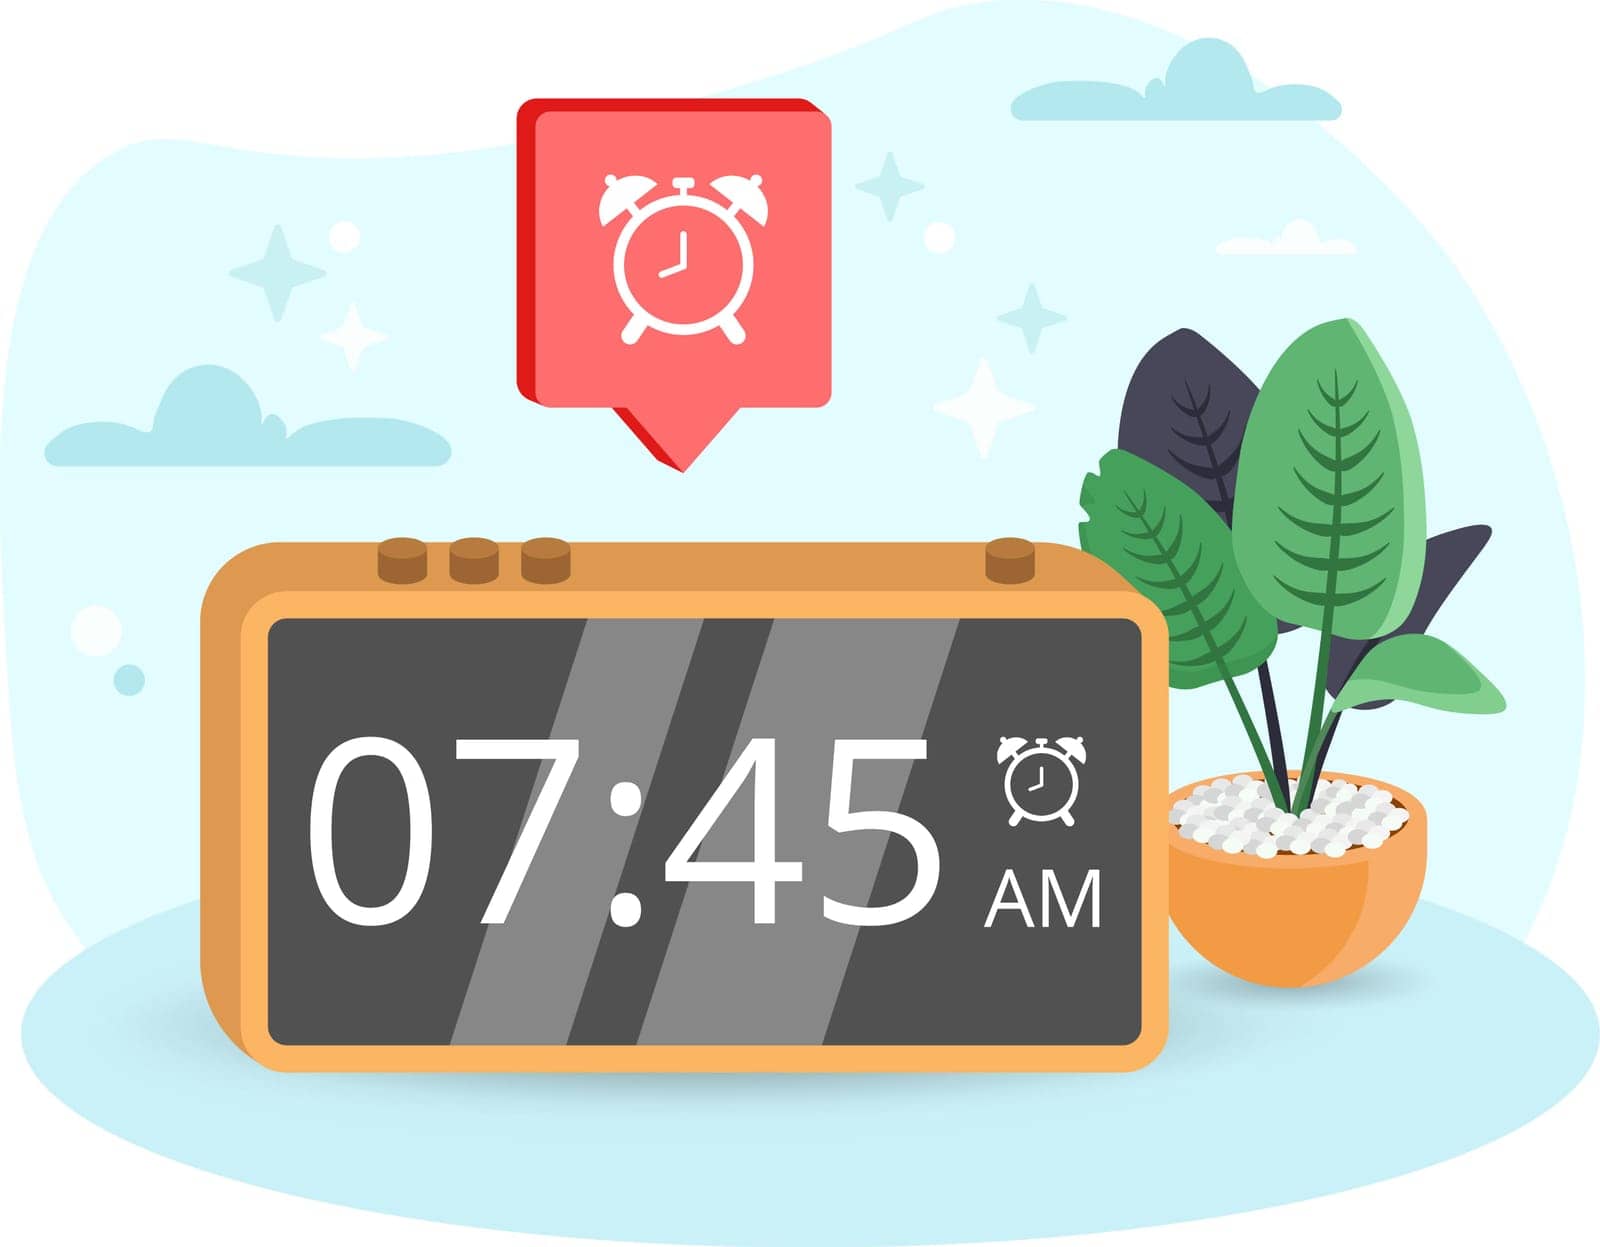 Alarm illustration. Clock, numbers, time, plant, pot. Vector graphics.